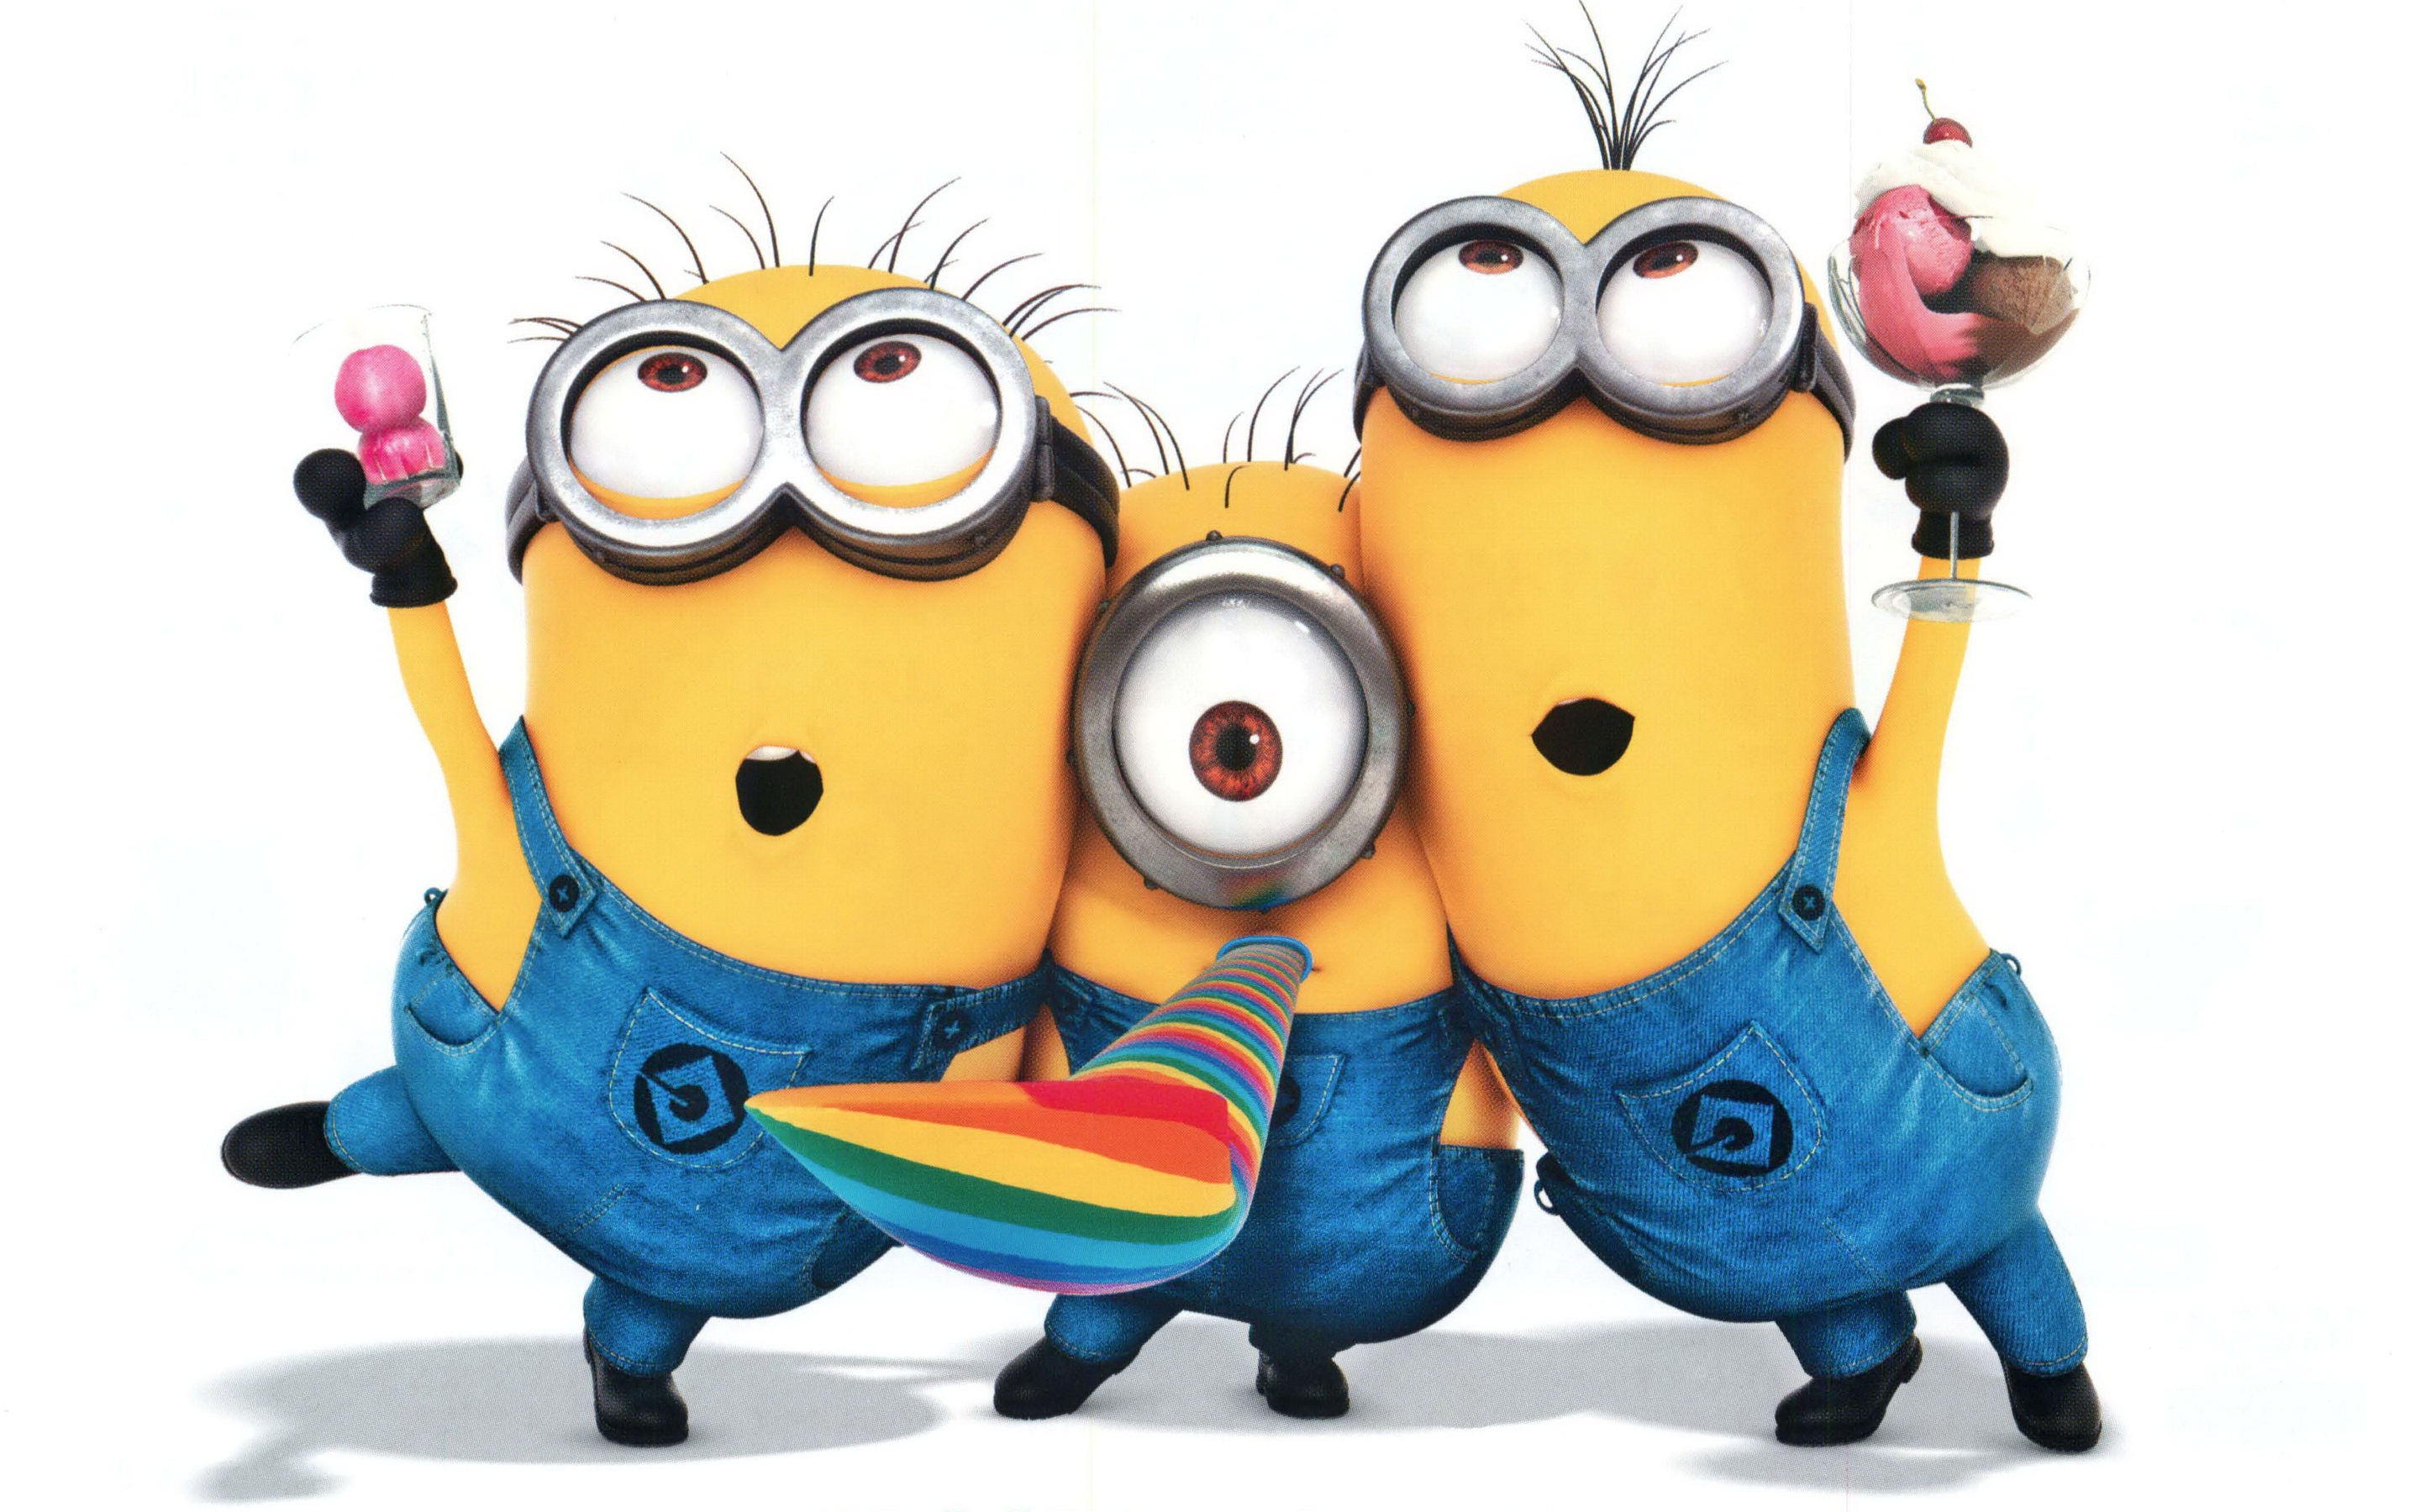 free clipart of minions - photo #26